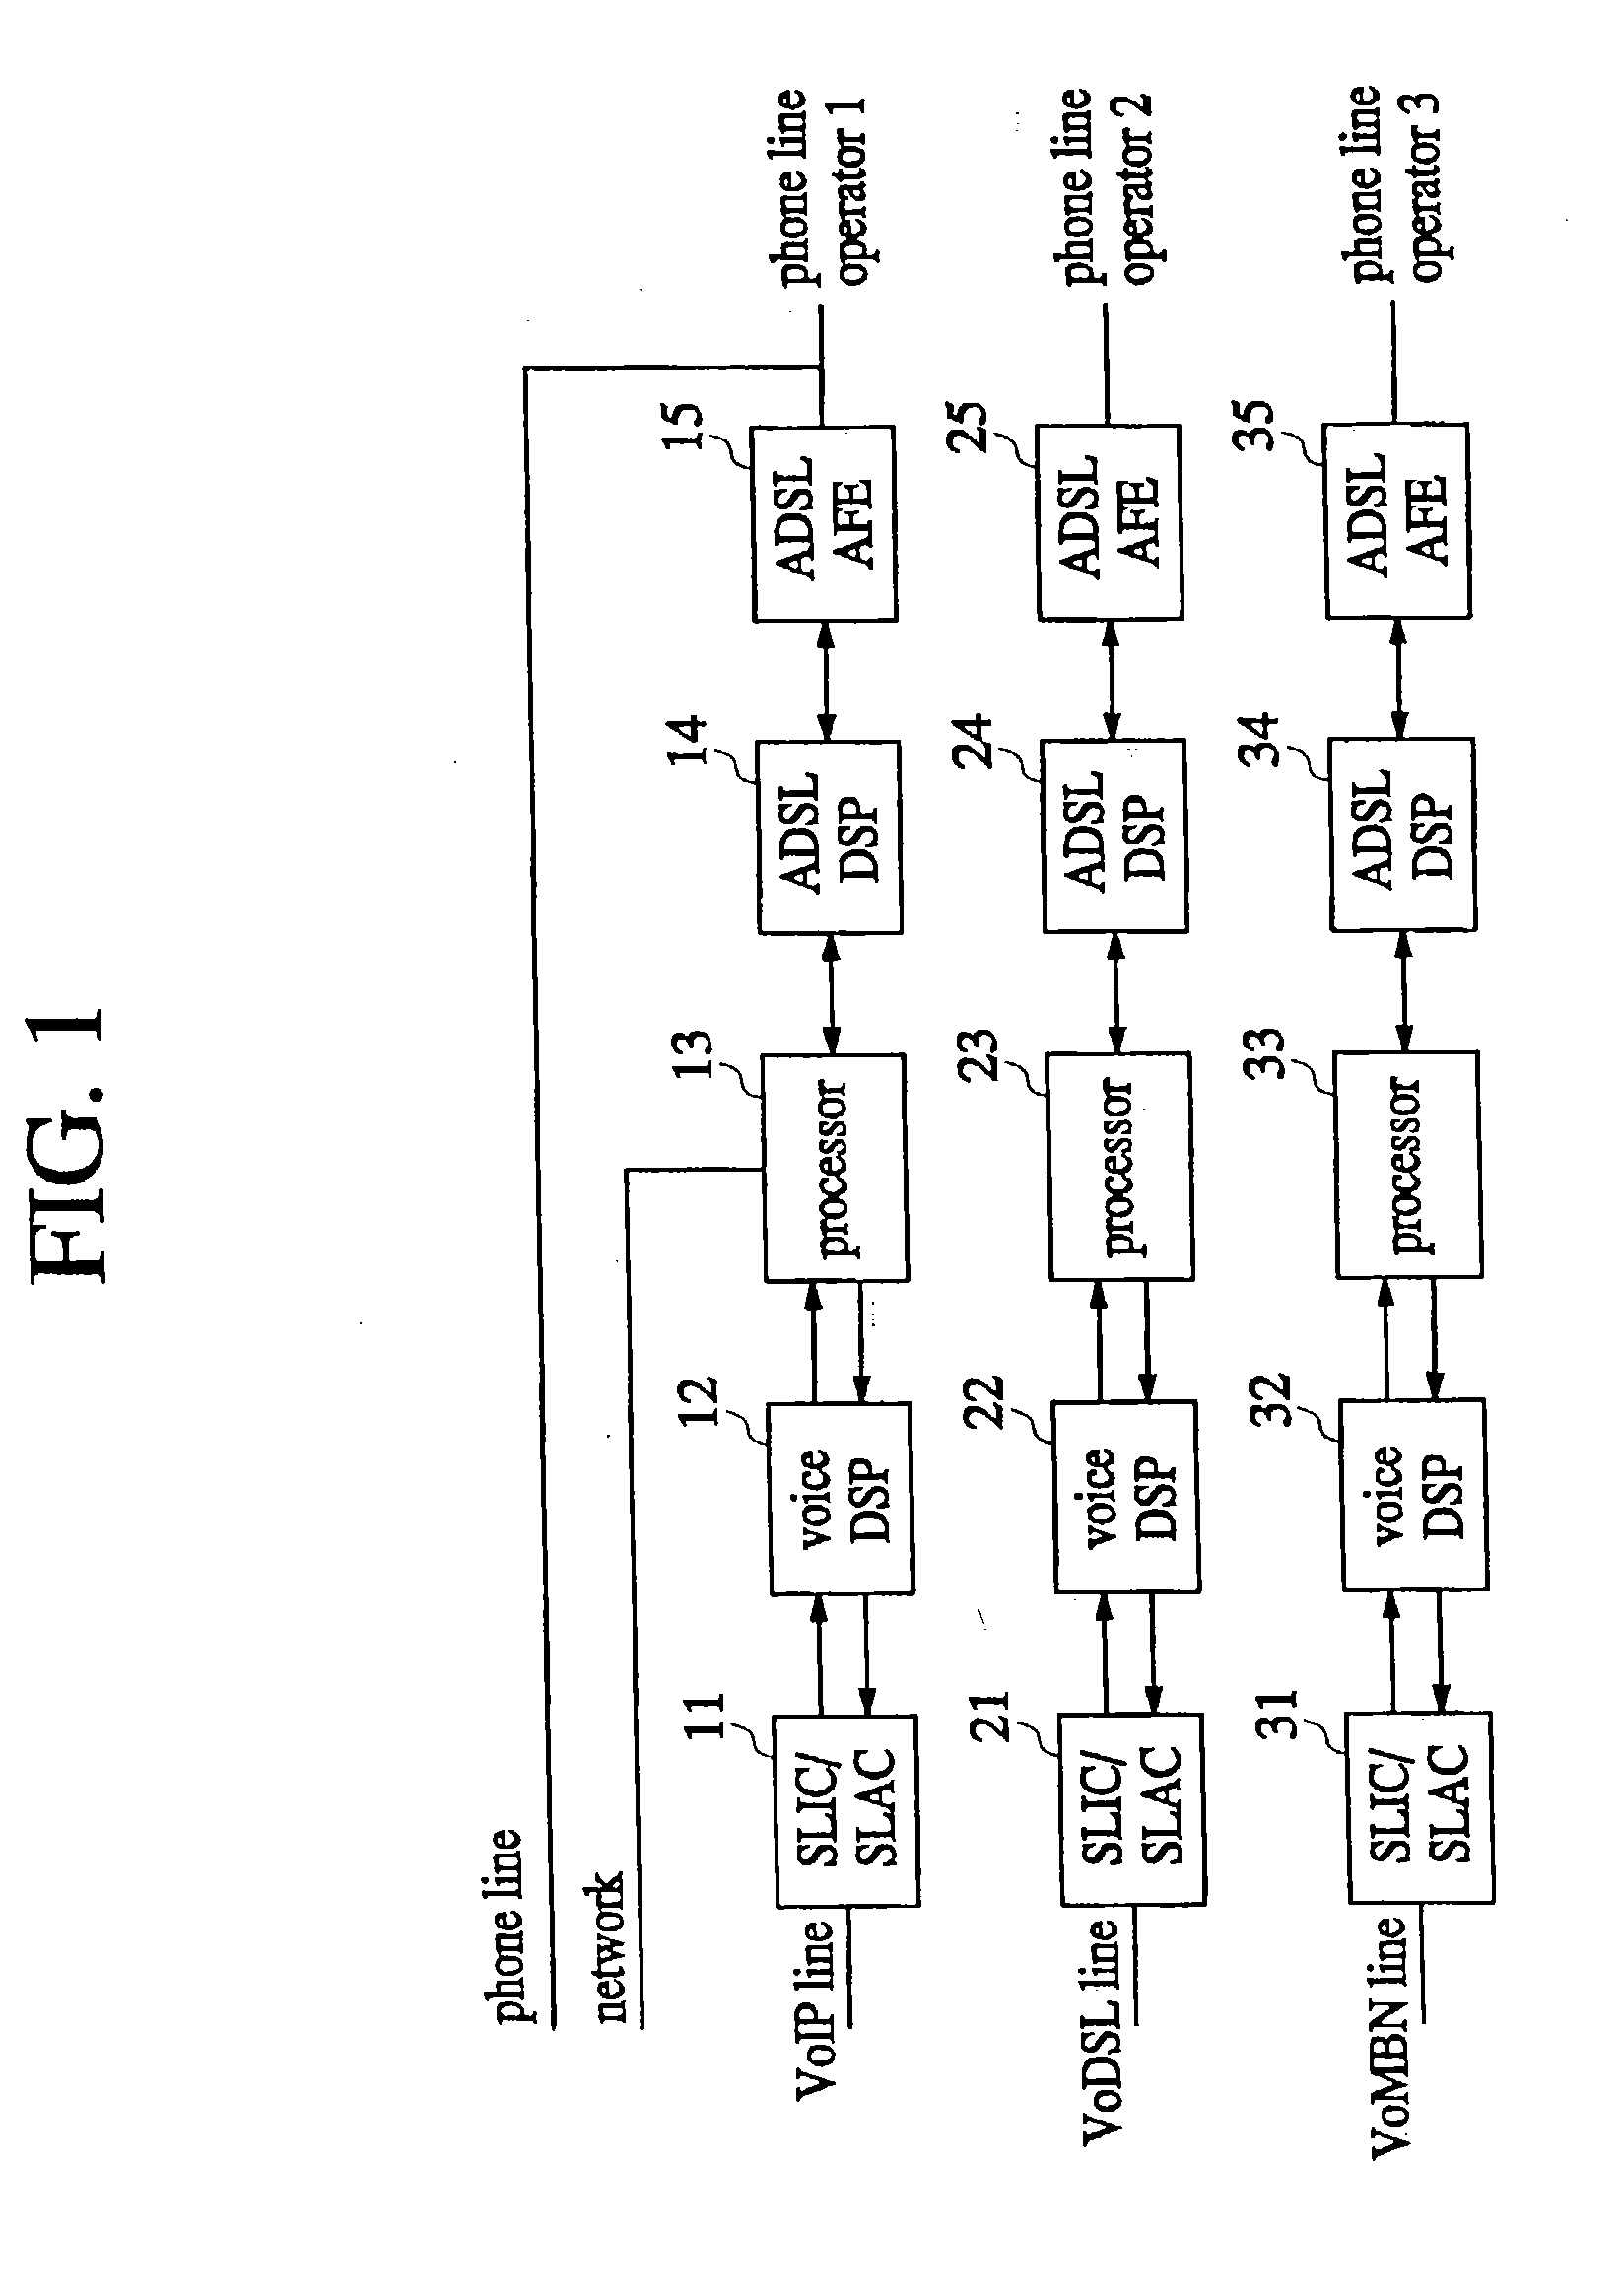 Composite voice service terminal apparatus, and method for using the same